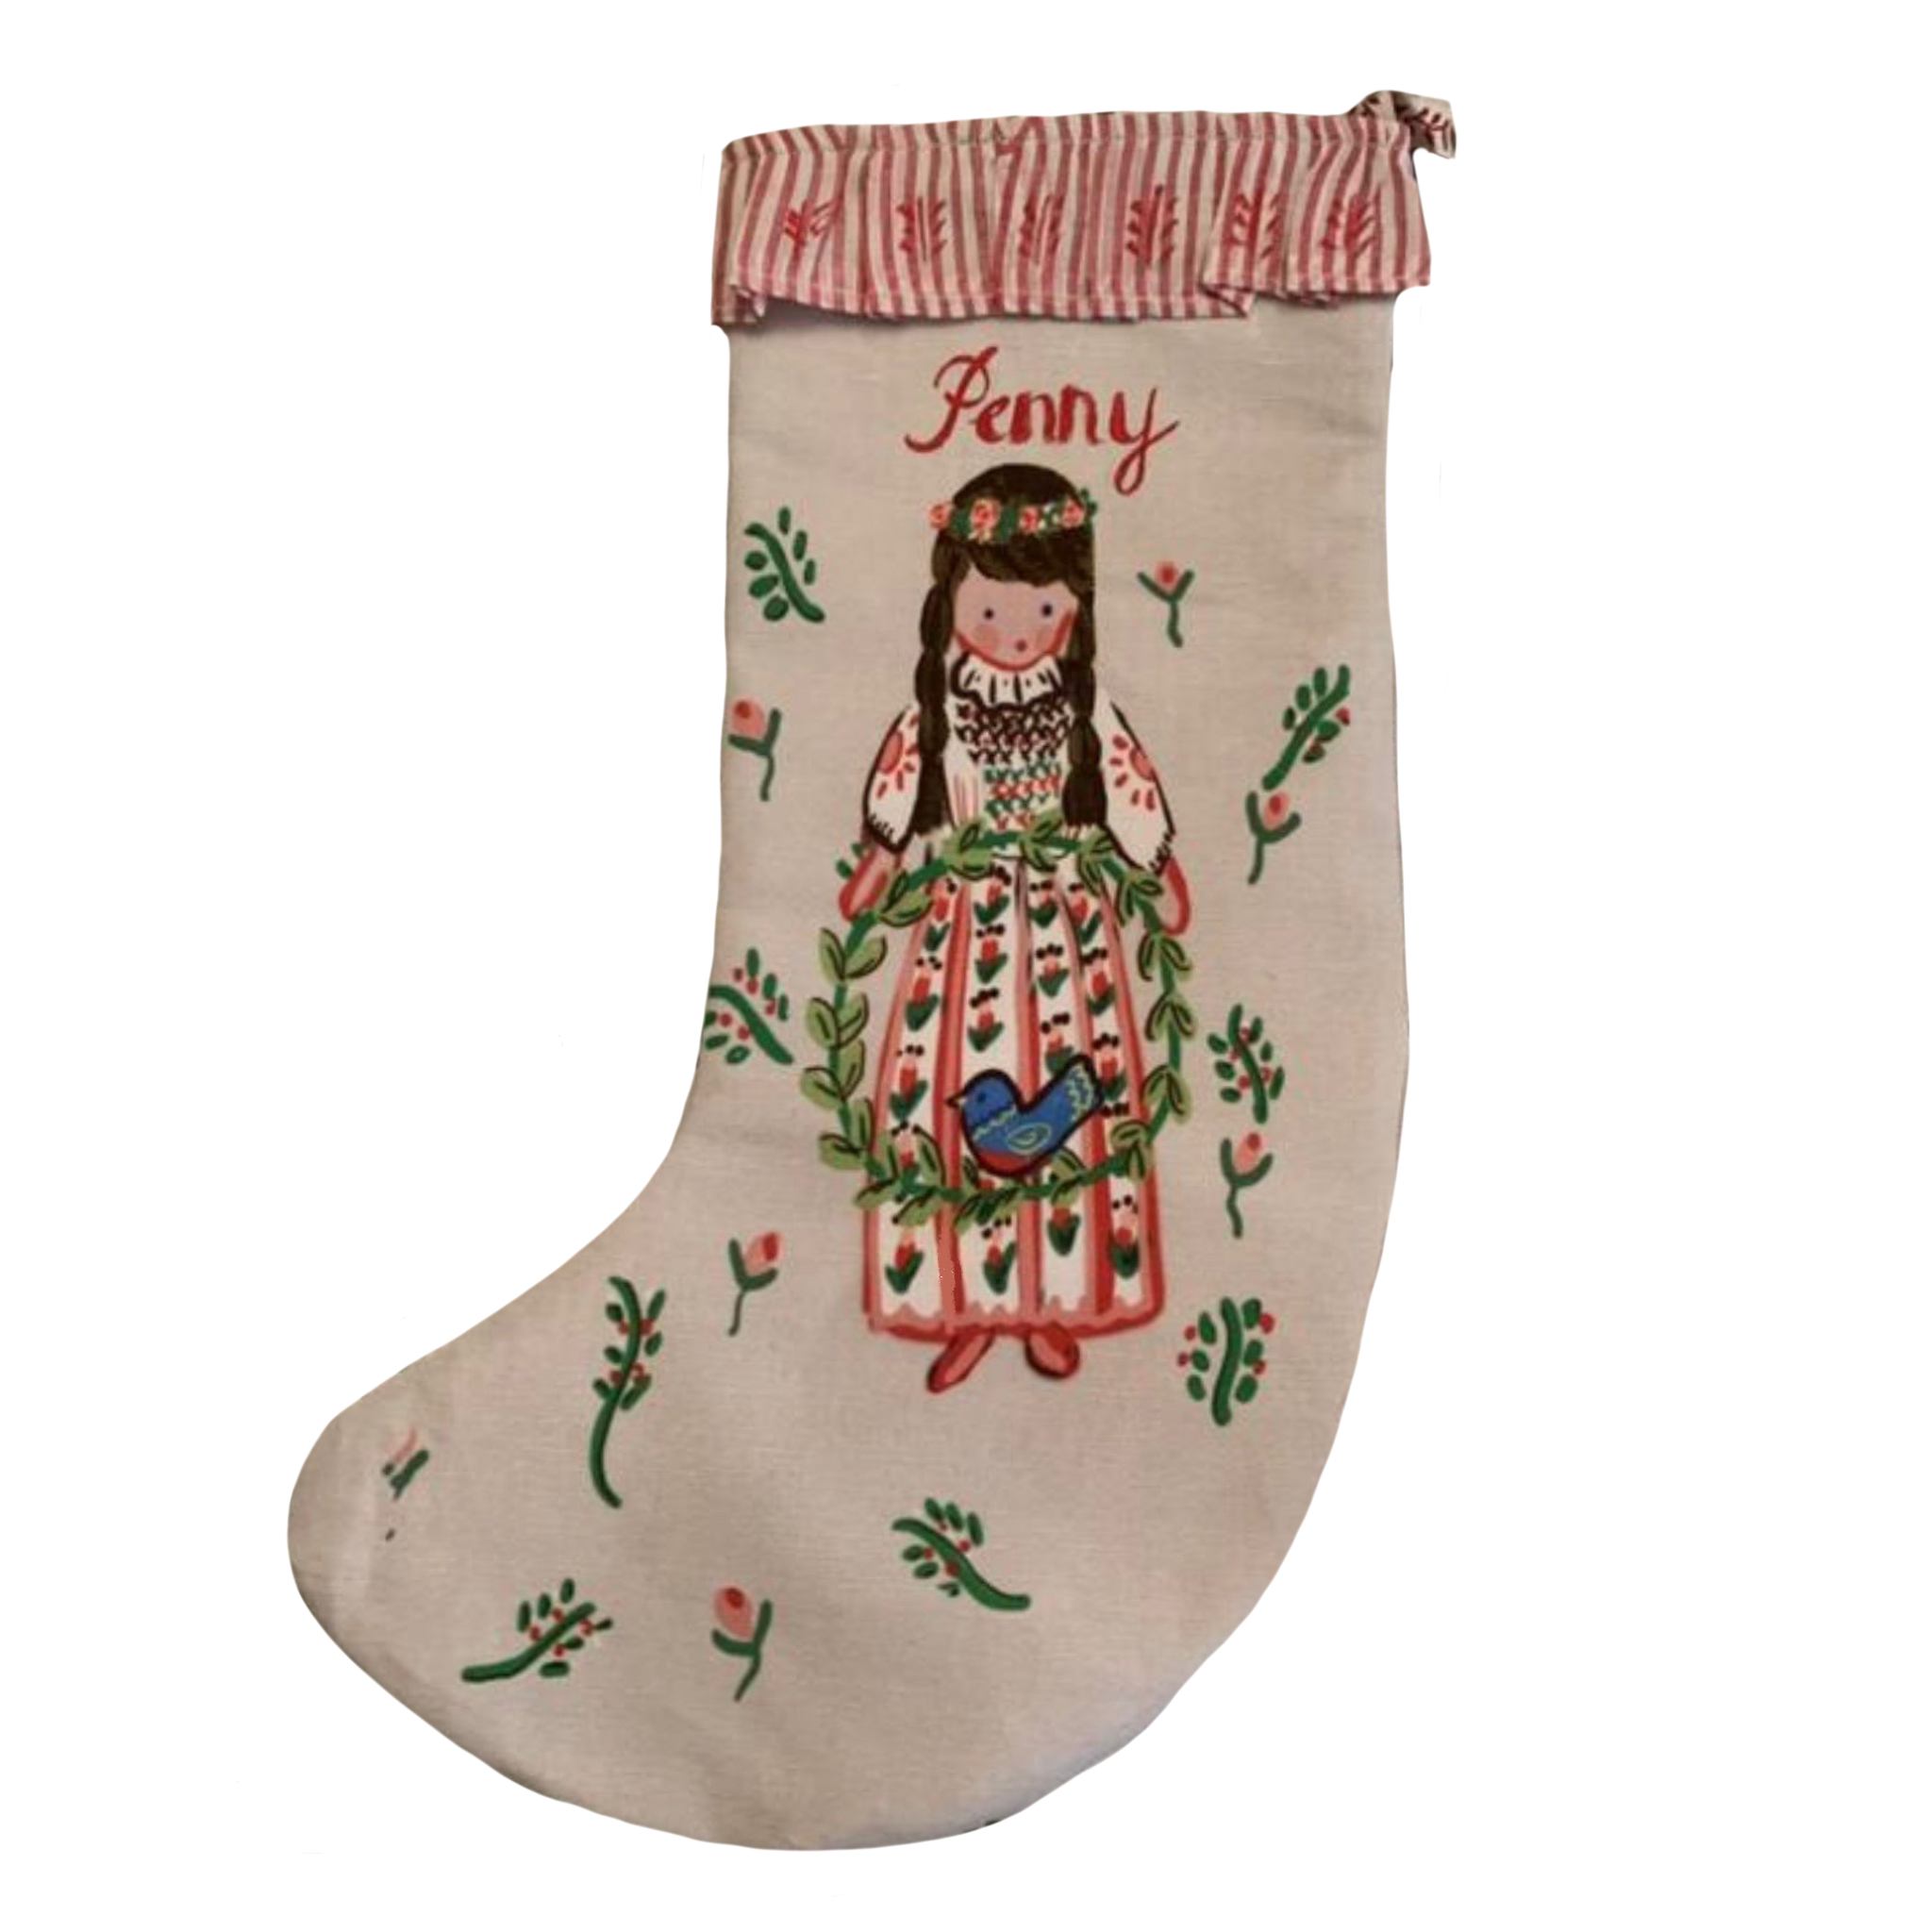 Stocking - Girl with Wreath and Bluebird - Tricia Lowenfield Design